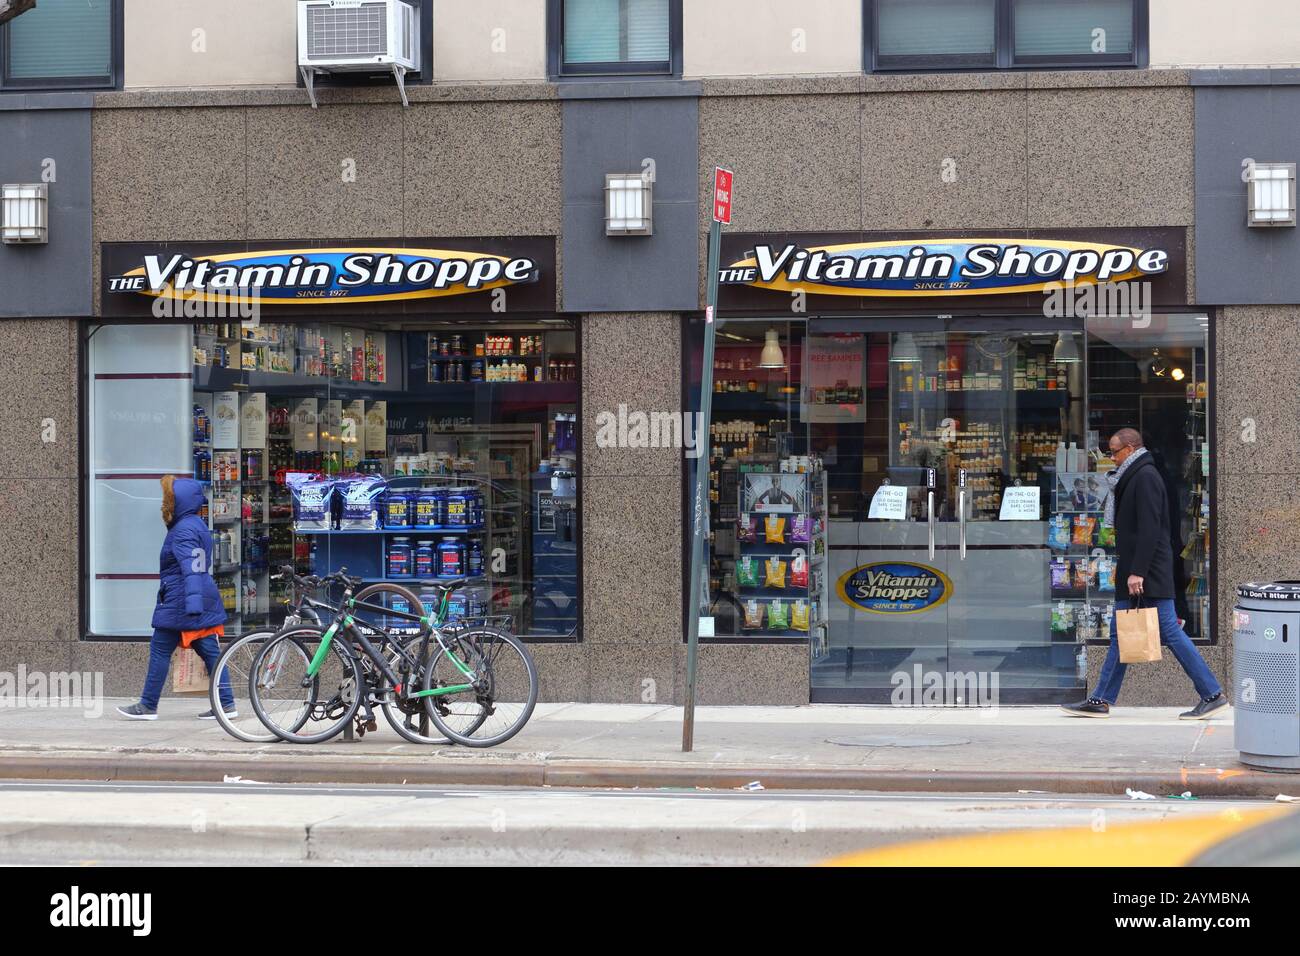 The Vitamin Shoppe, 257 8th Ave, New York. NYC storefront photo of a vitamin and nutritional supplement store in the Chelsea neighborhood of Manhat Stock Photo